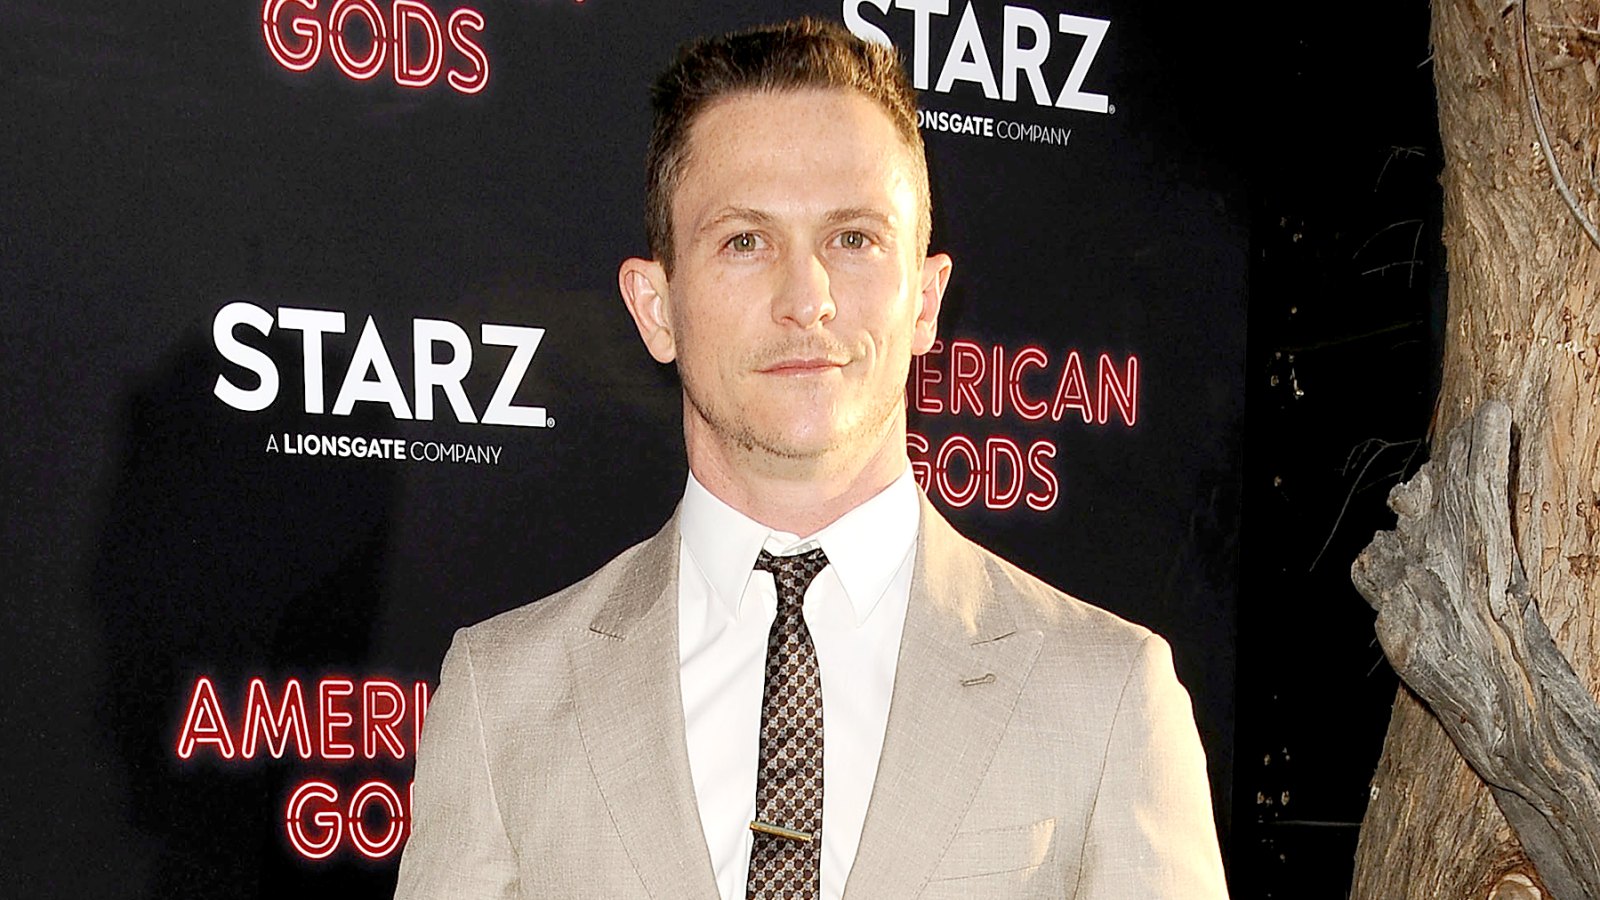 Jonathan Tucker attends the premiere of "American Gods" at ArcLight Cinemas Cinerama Dome on April 20, 2017 in Hollywood, California.